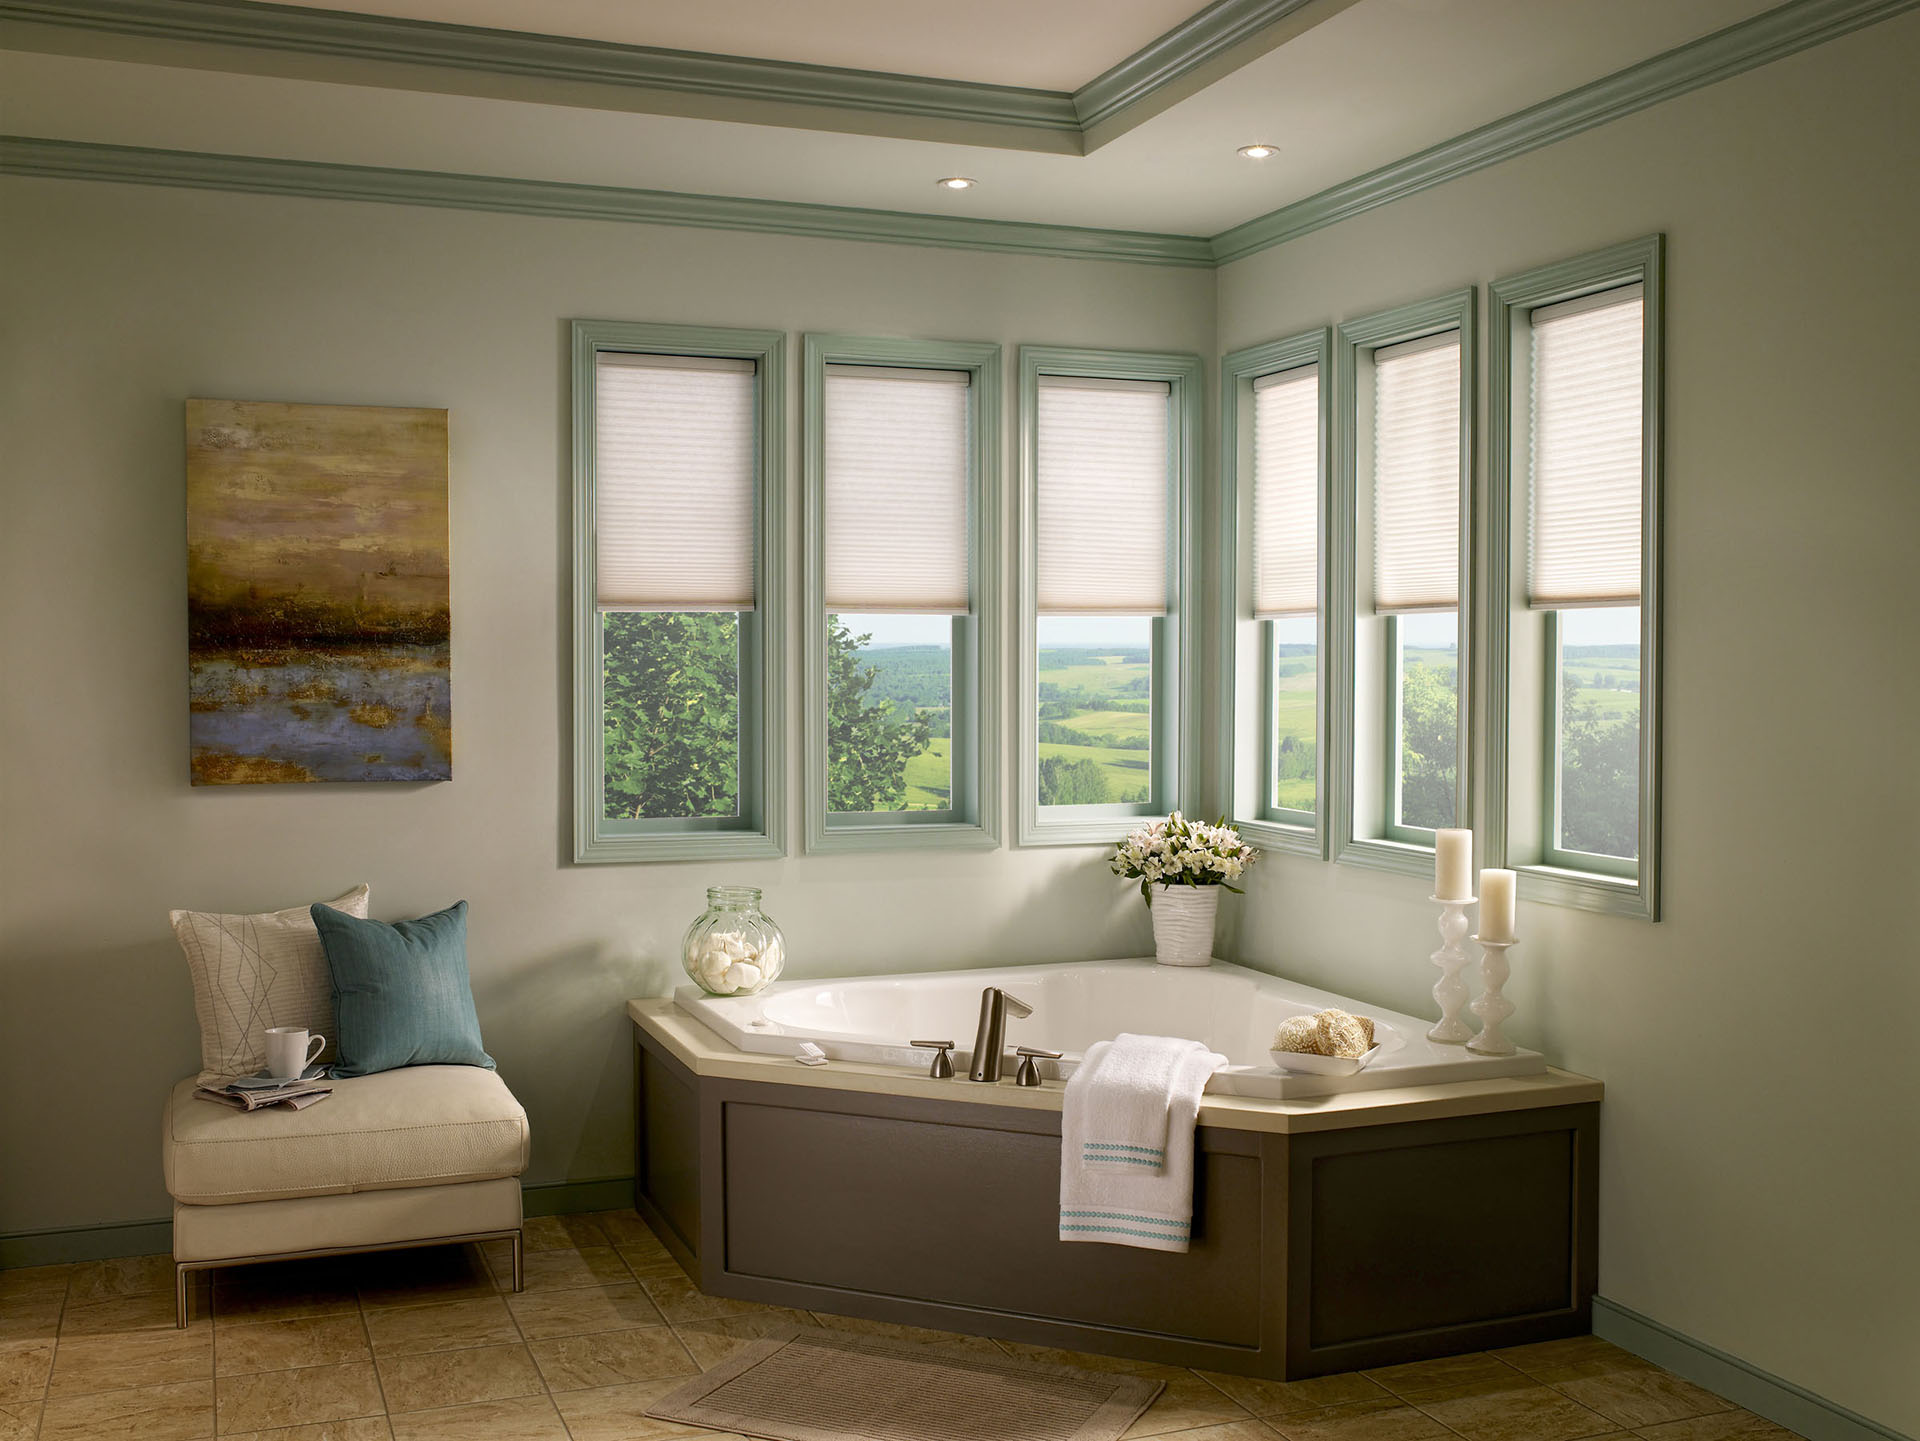 The Answers to Your Questions About Commercial Motorized Shades featured image